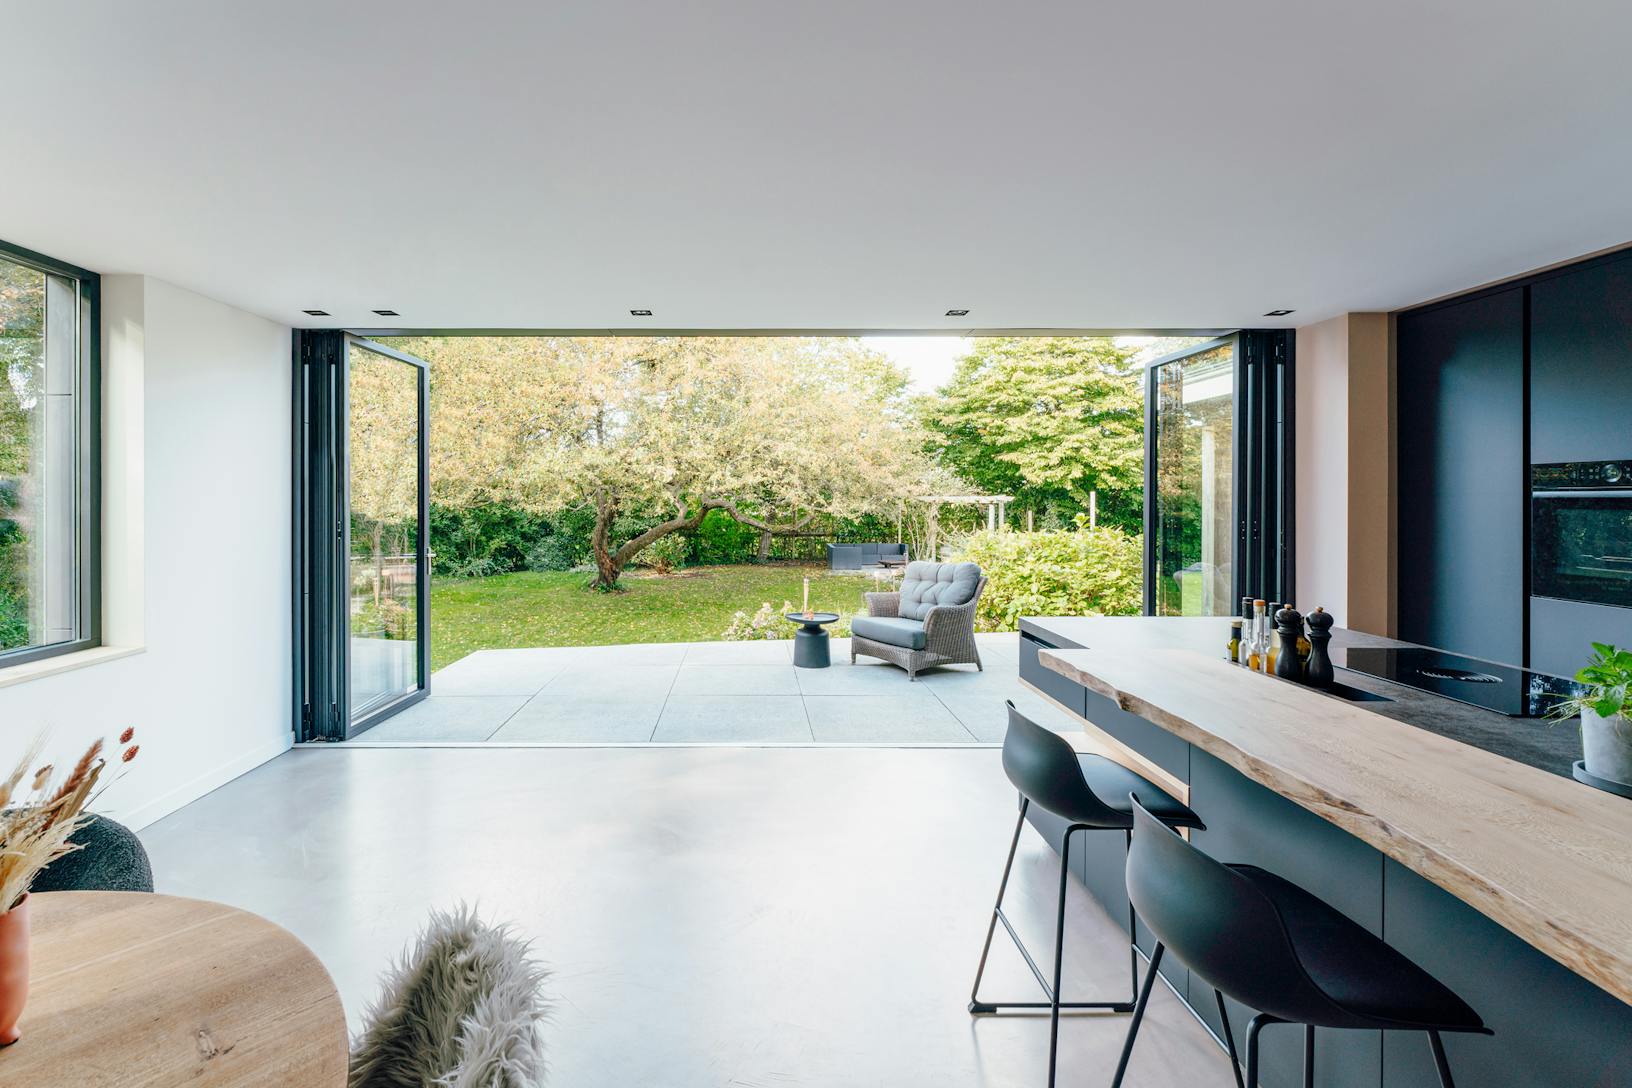 A modern kitchen with a view of the garden - Interior glass doors